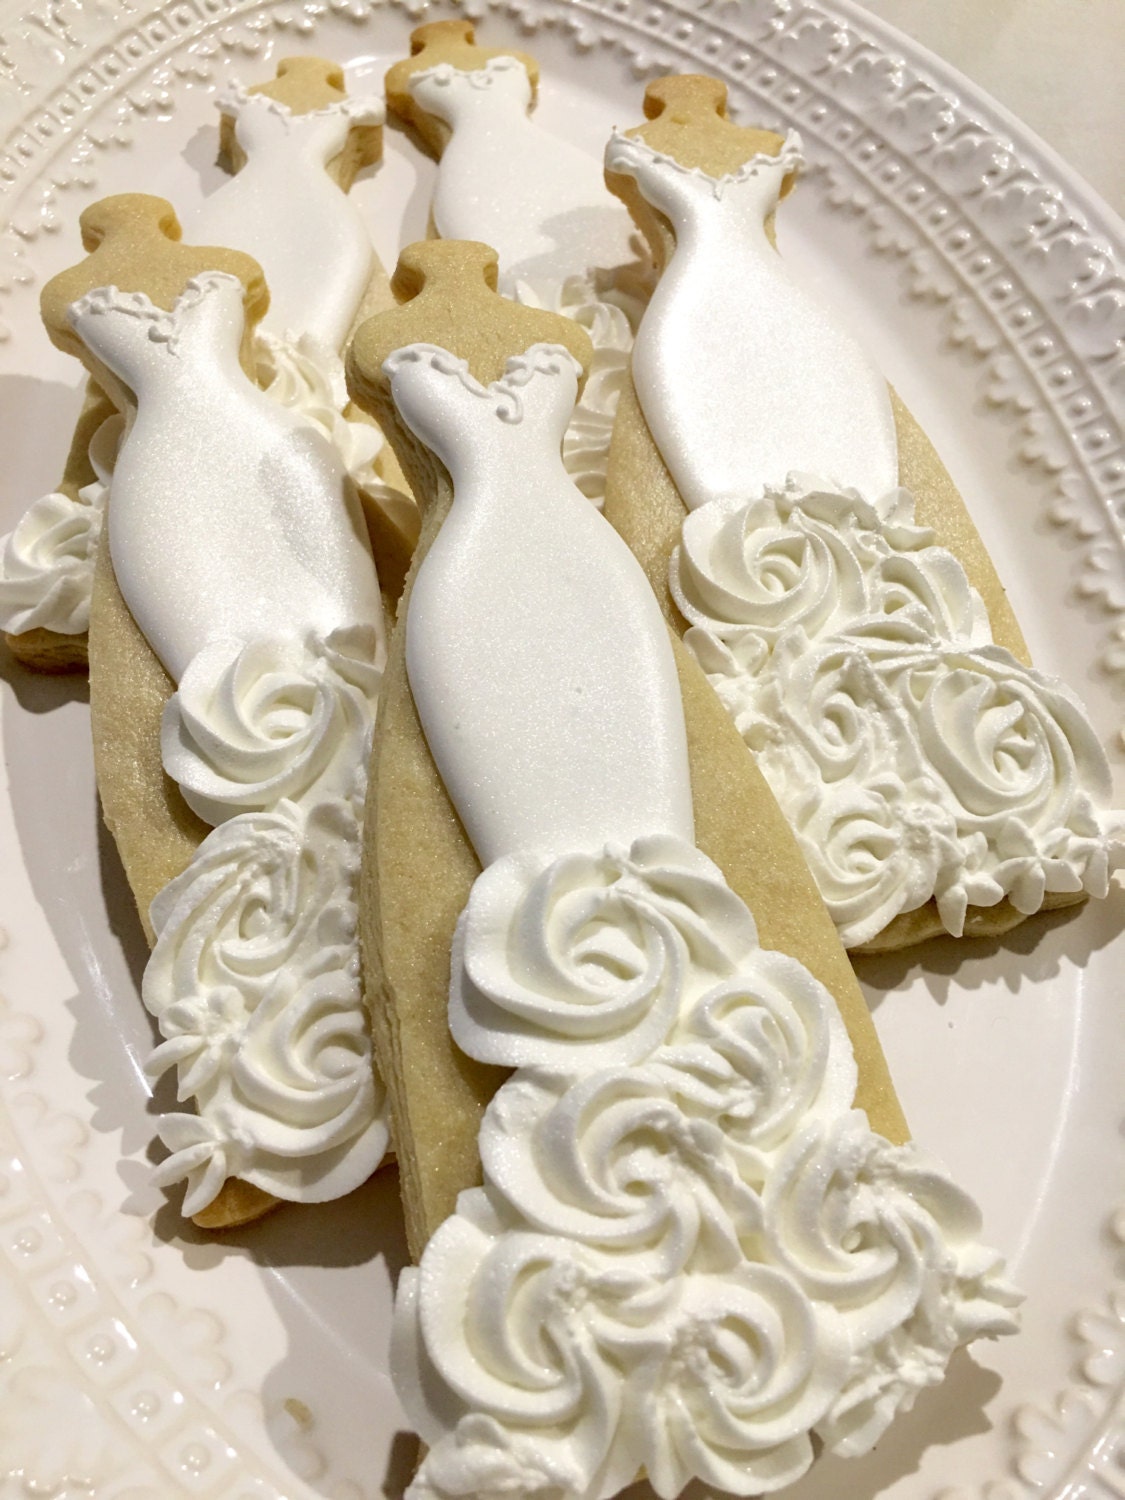 10 Bridal Wedding Dress Cookies With Rosette Design For Wedding Favors Bridal Showers Bridesmaid Proposals